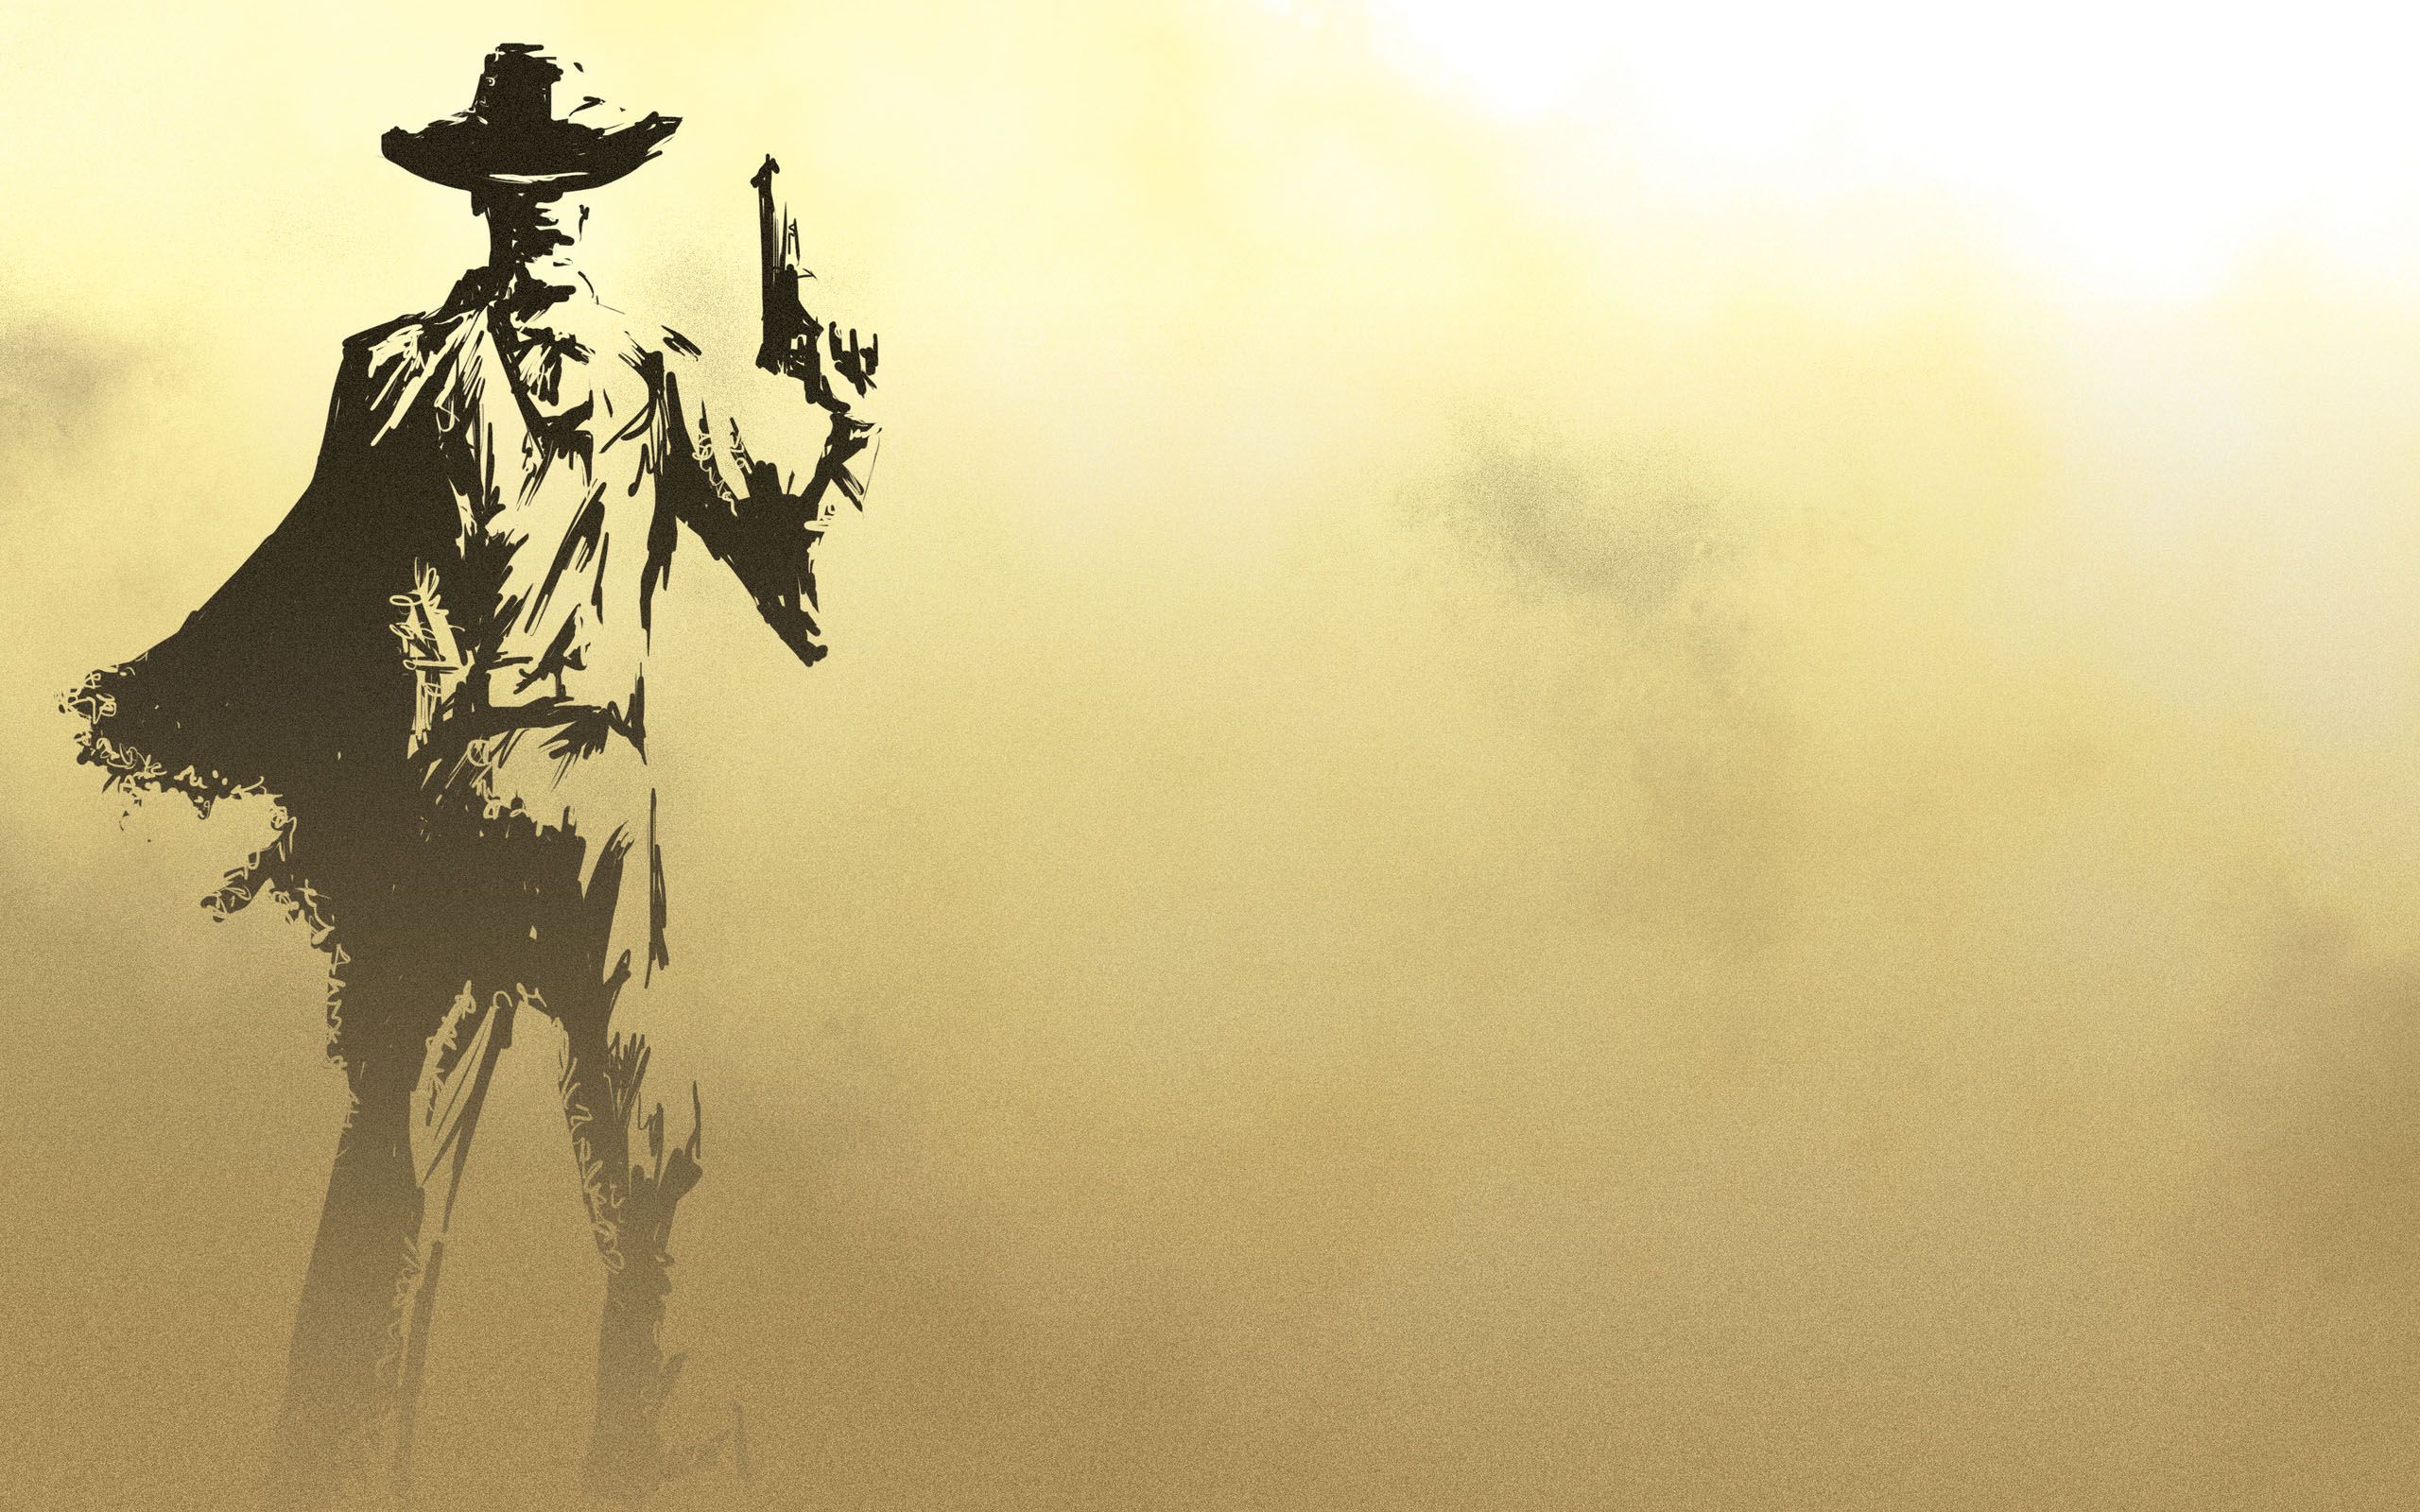 Gallery for - cowboy wallpaper